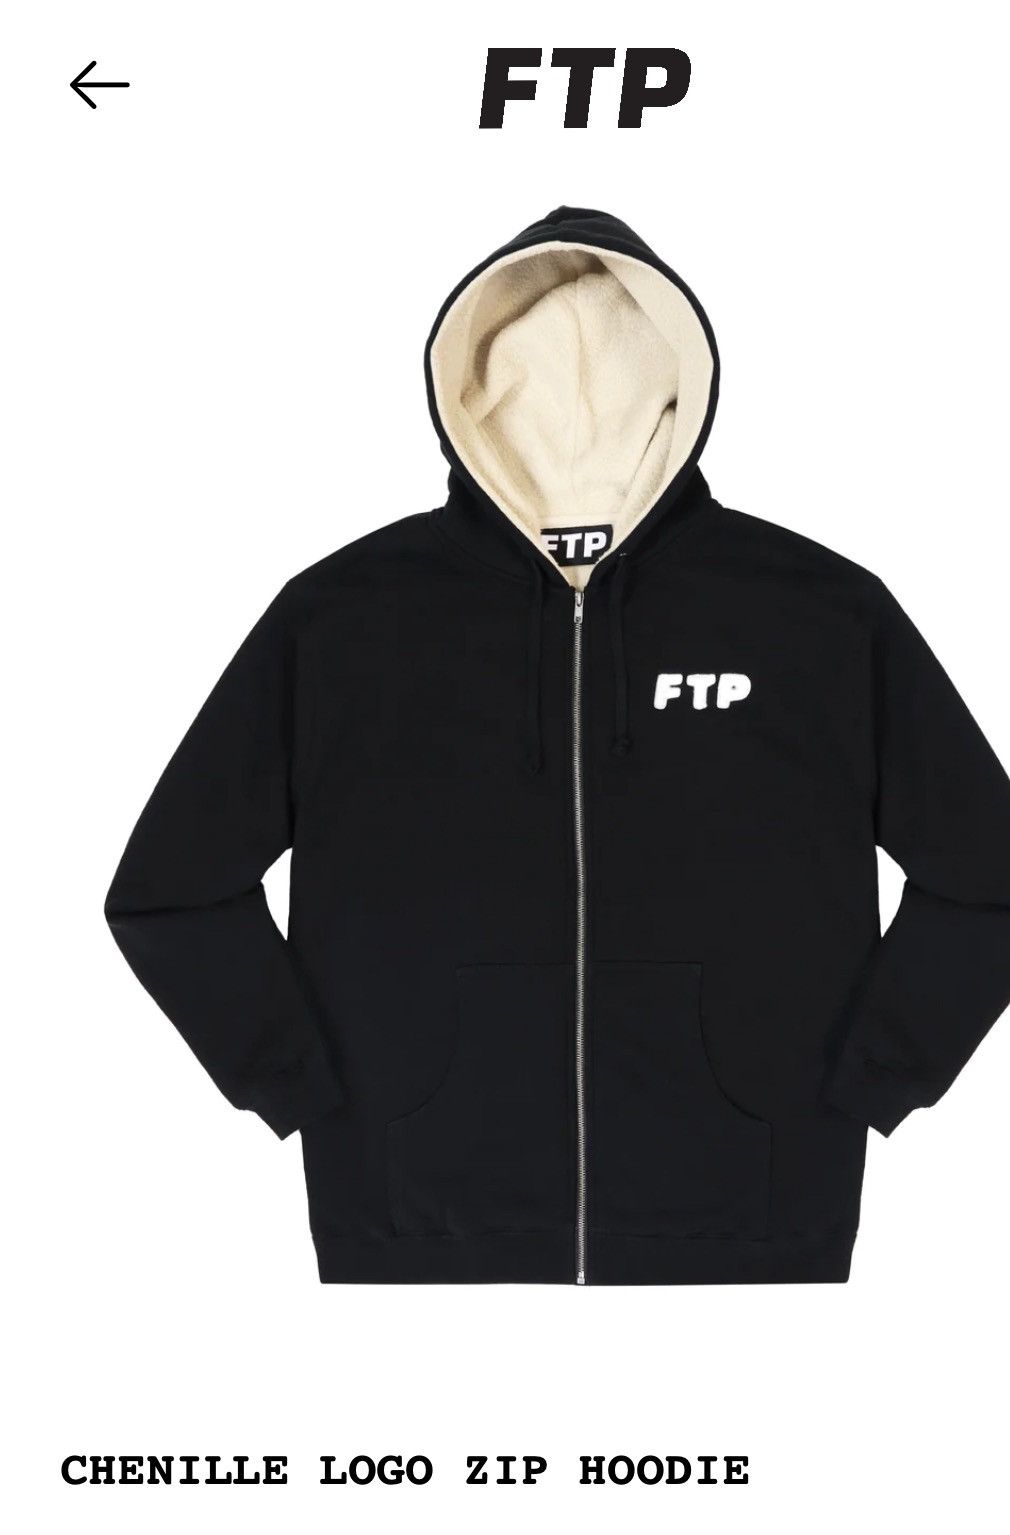 FTP ARCH LOGO PULLOVER HEATHER GRAY XL - パーカー